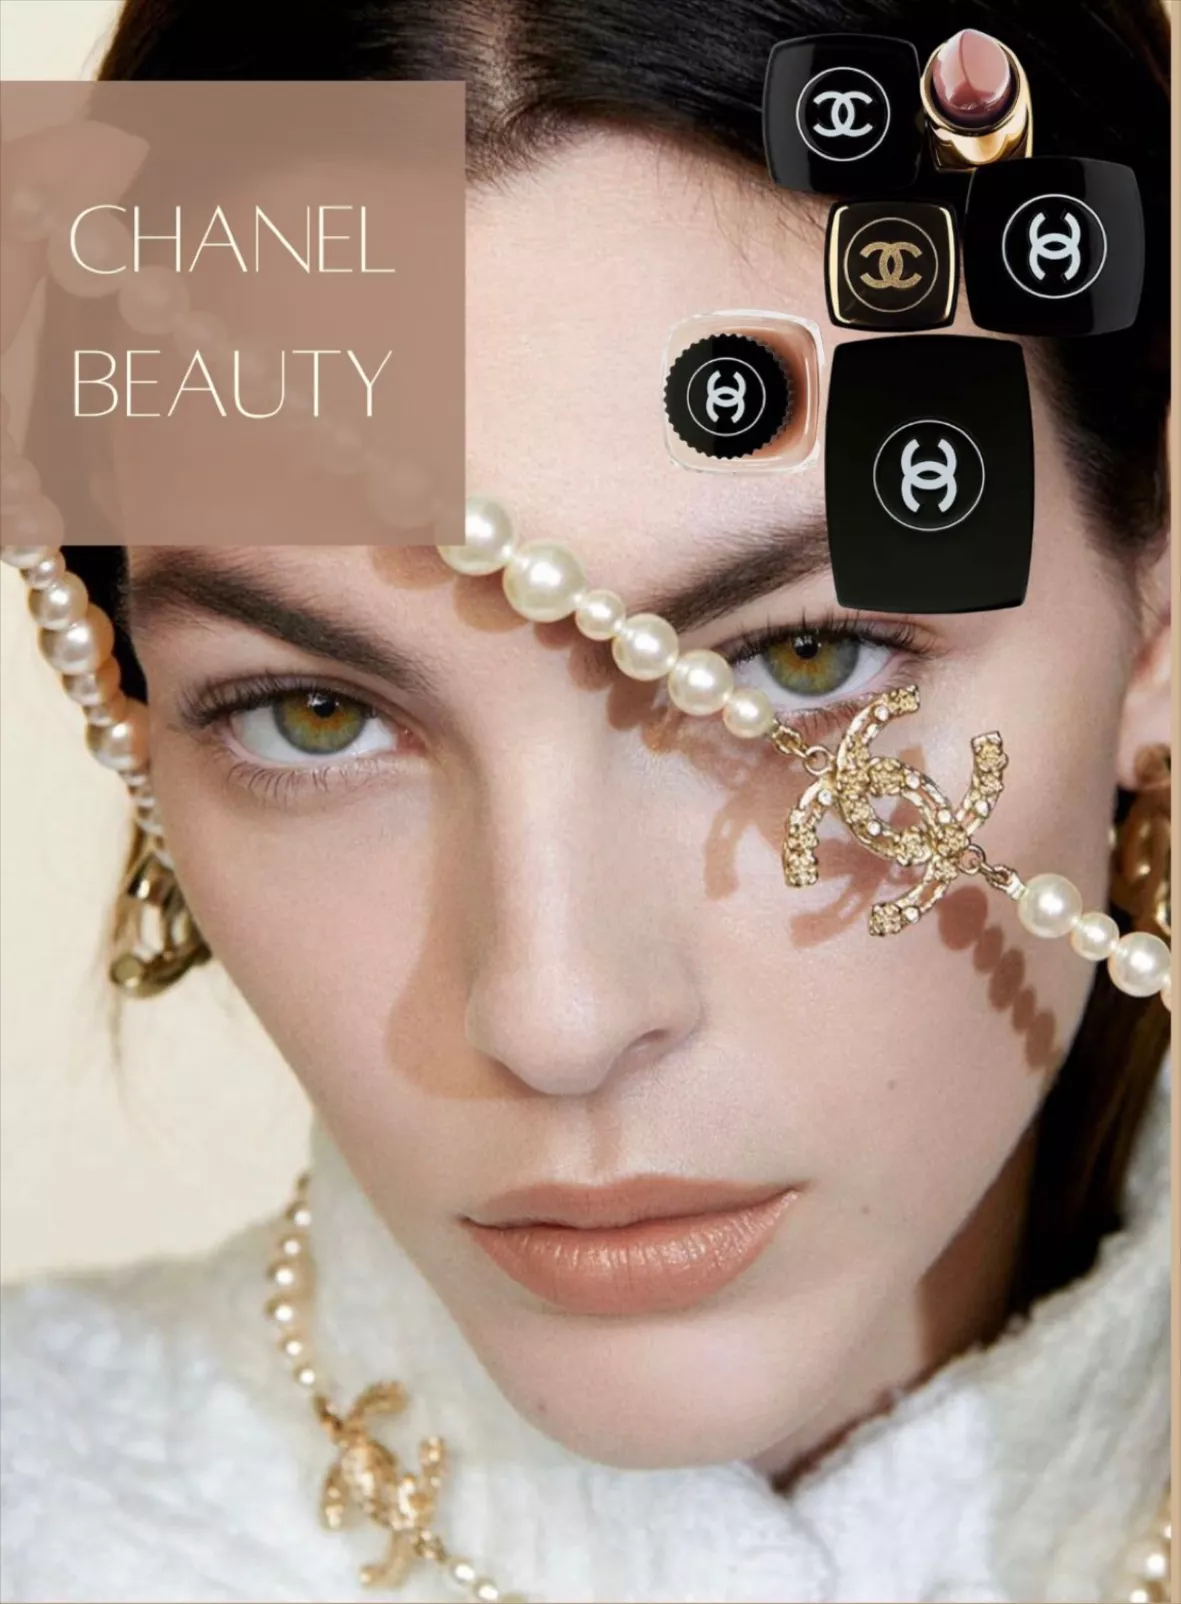 2022 Chanel beauty holiday gift sets